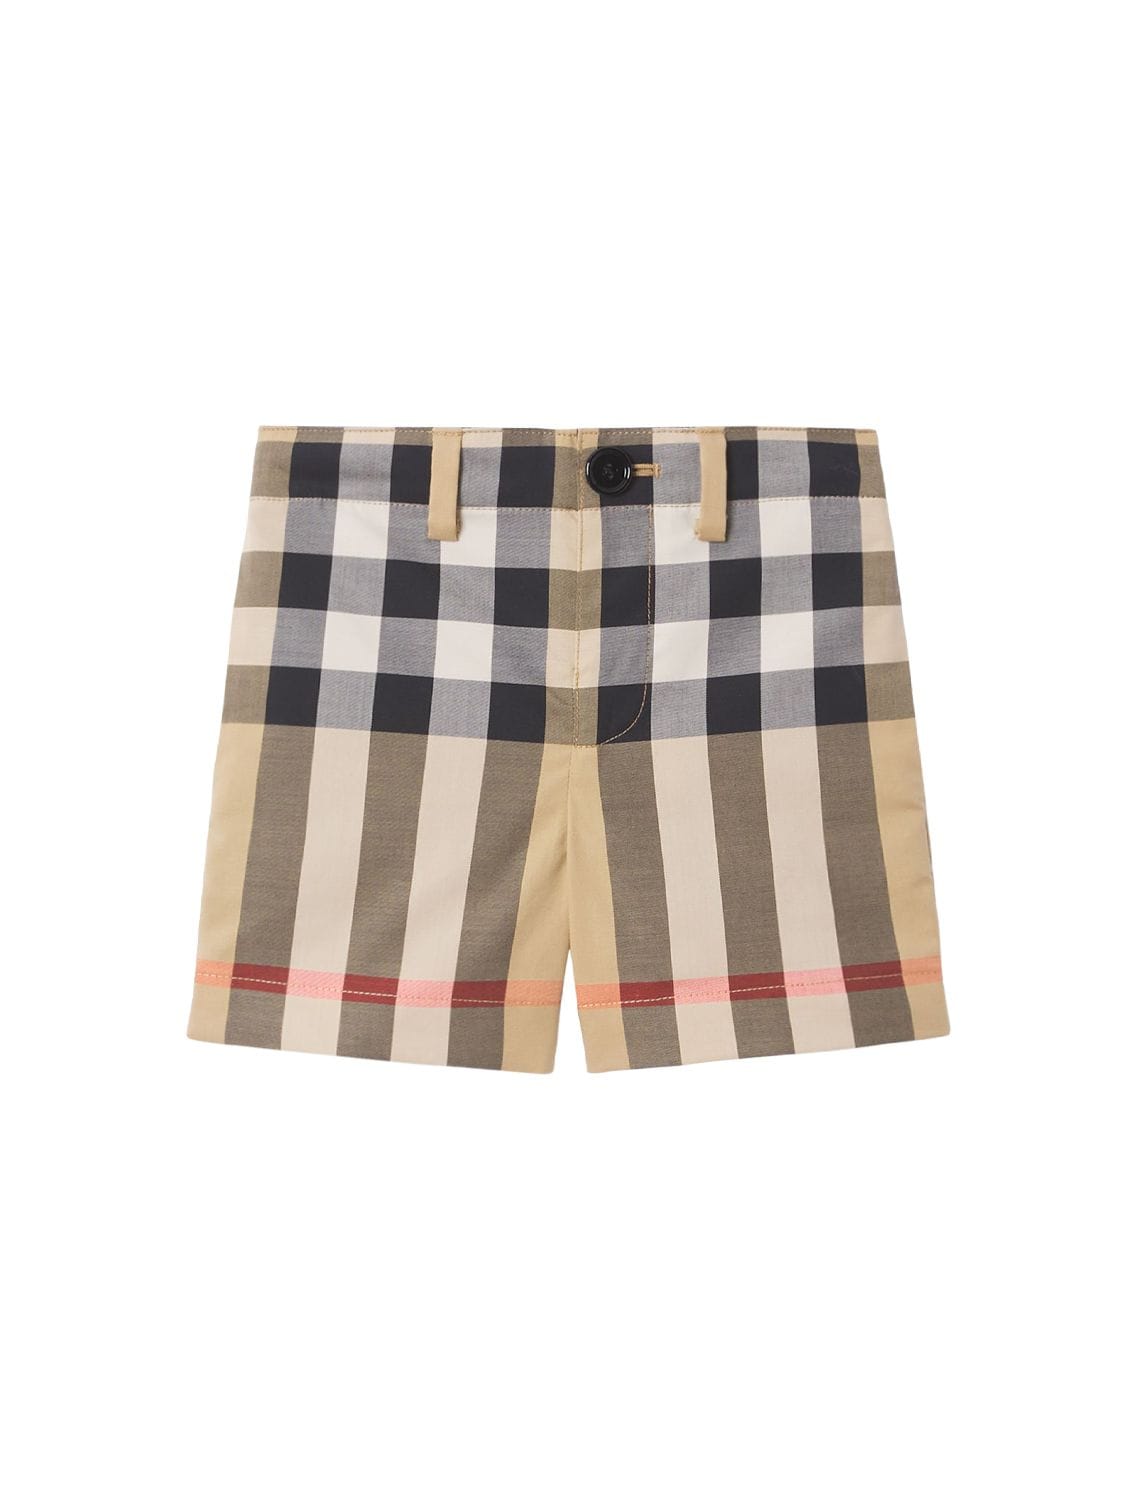 Image of Check Print Stretch Cotton Shorts